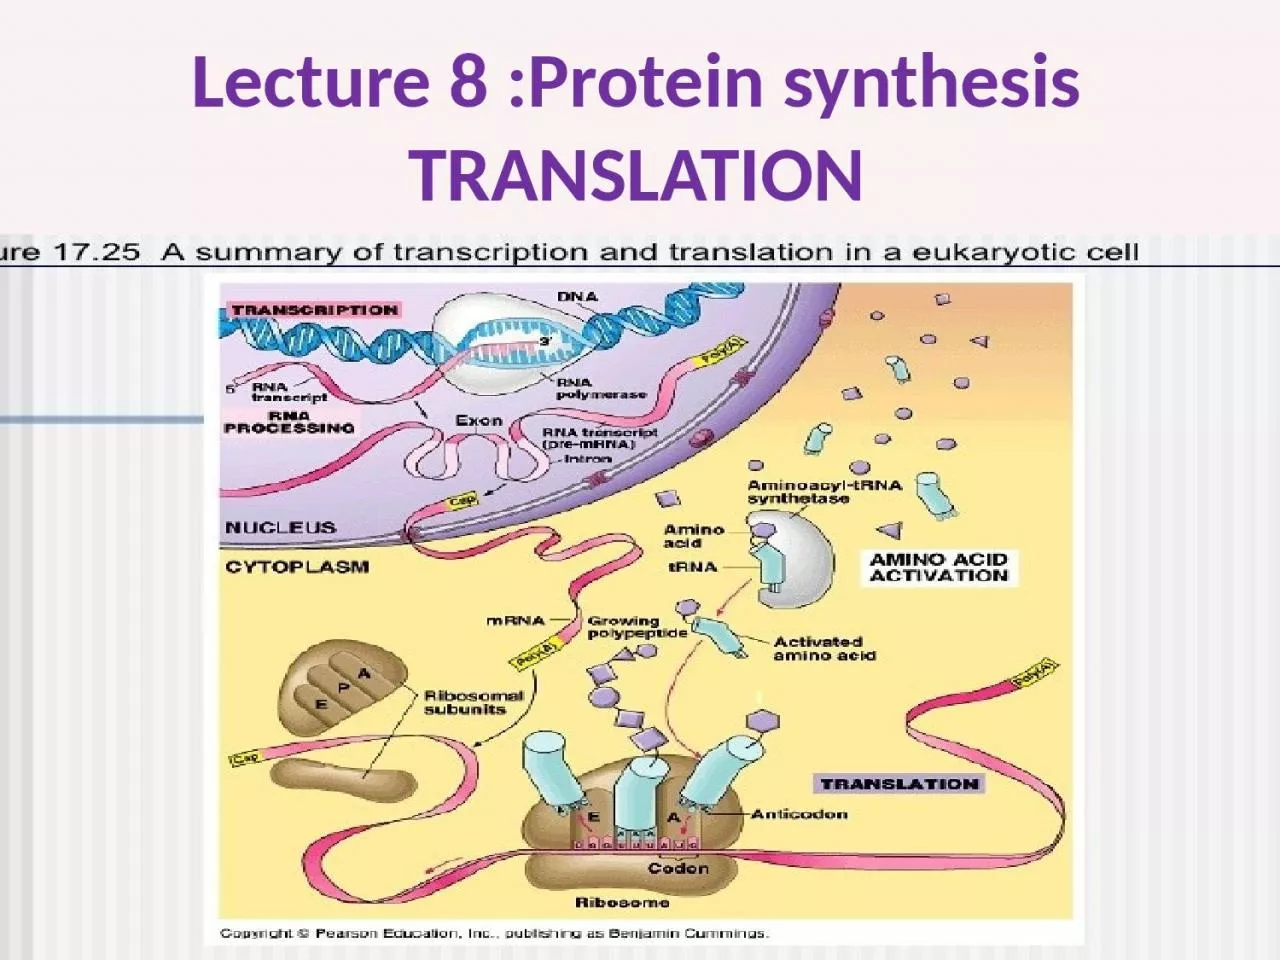 Lecture 8 :Protein synthesis